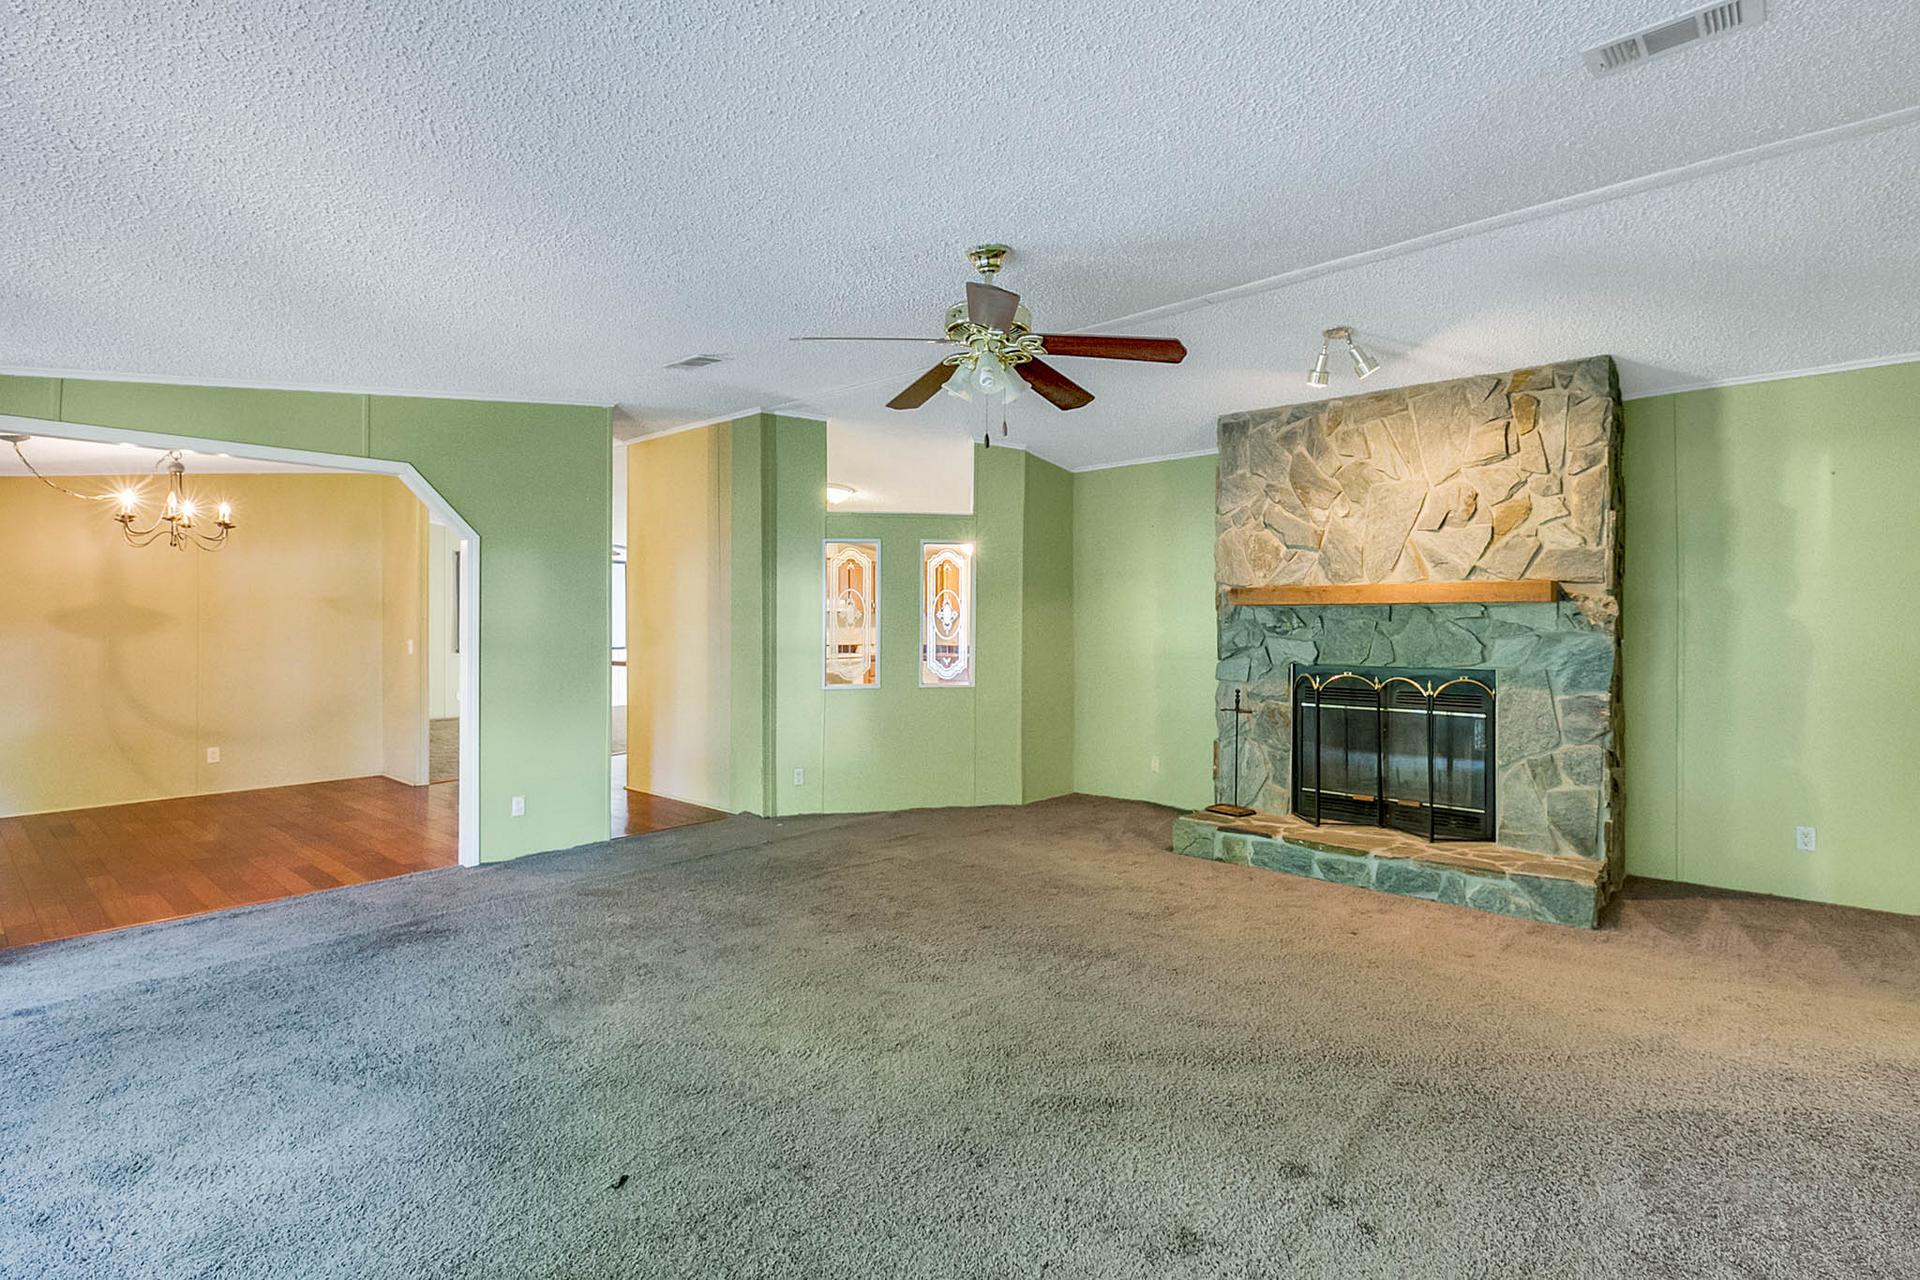 11612-North-St.--Gibsonton--FL-33534--02--Living-Room-No-Fire-in-Fireplace.jpg